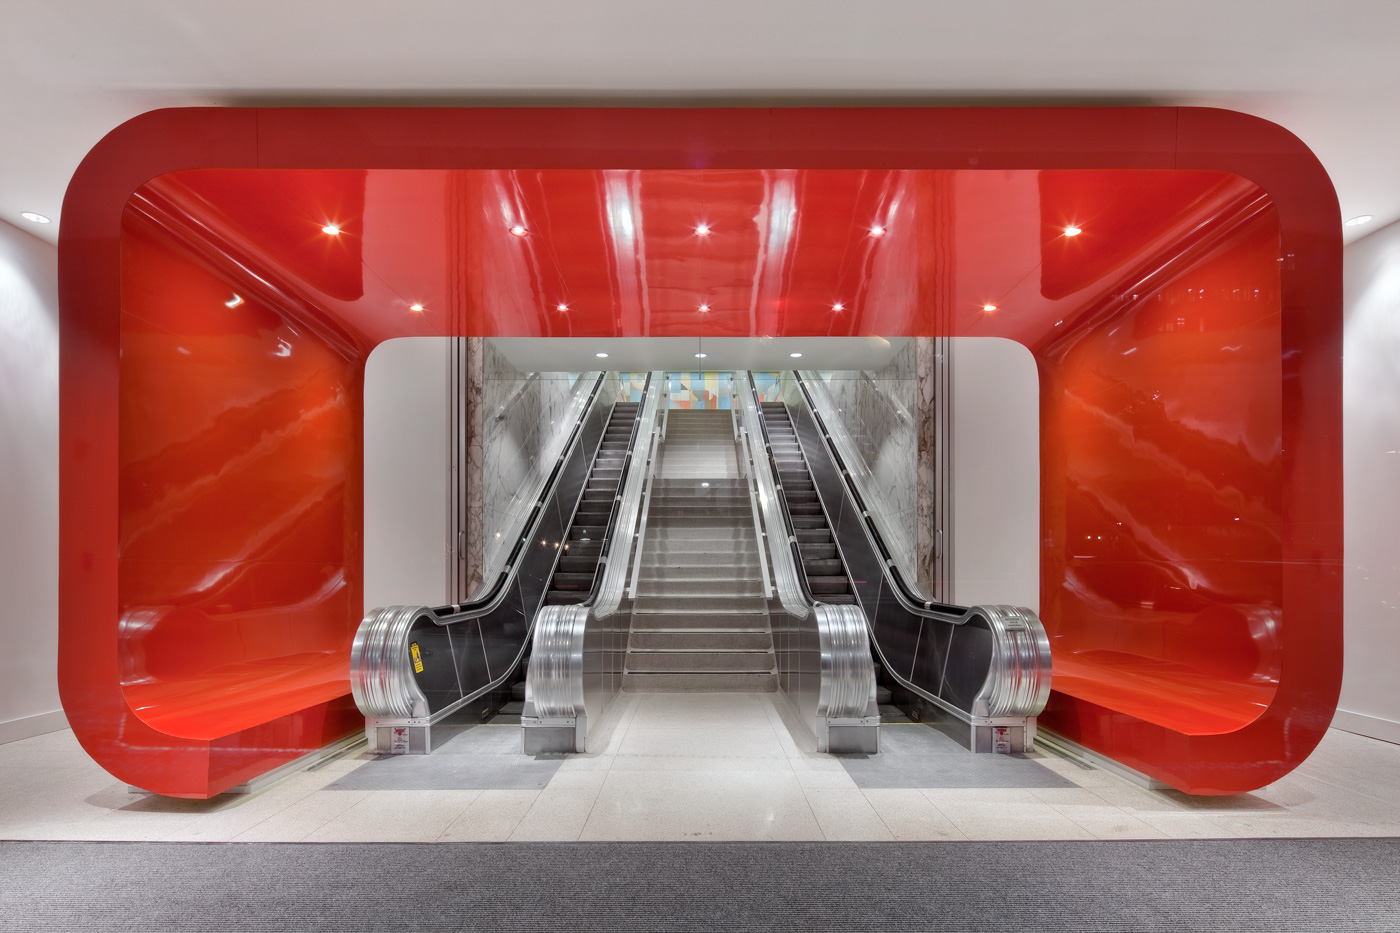 Statement red sculptural entrance to office buildings escalators.